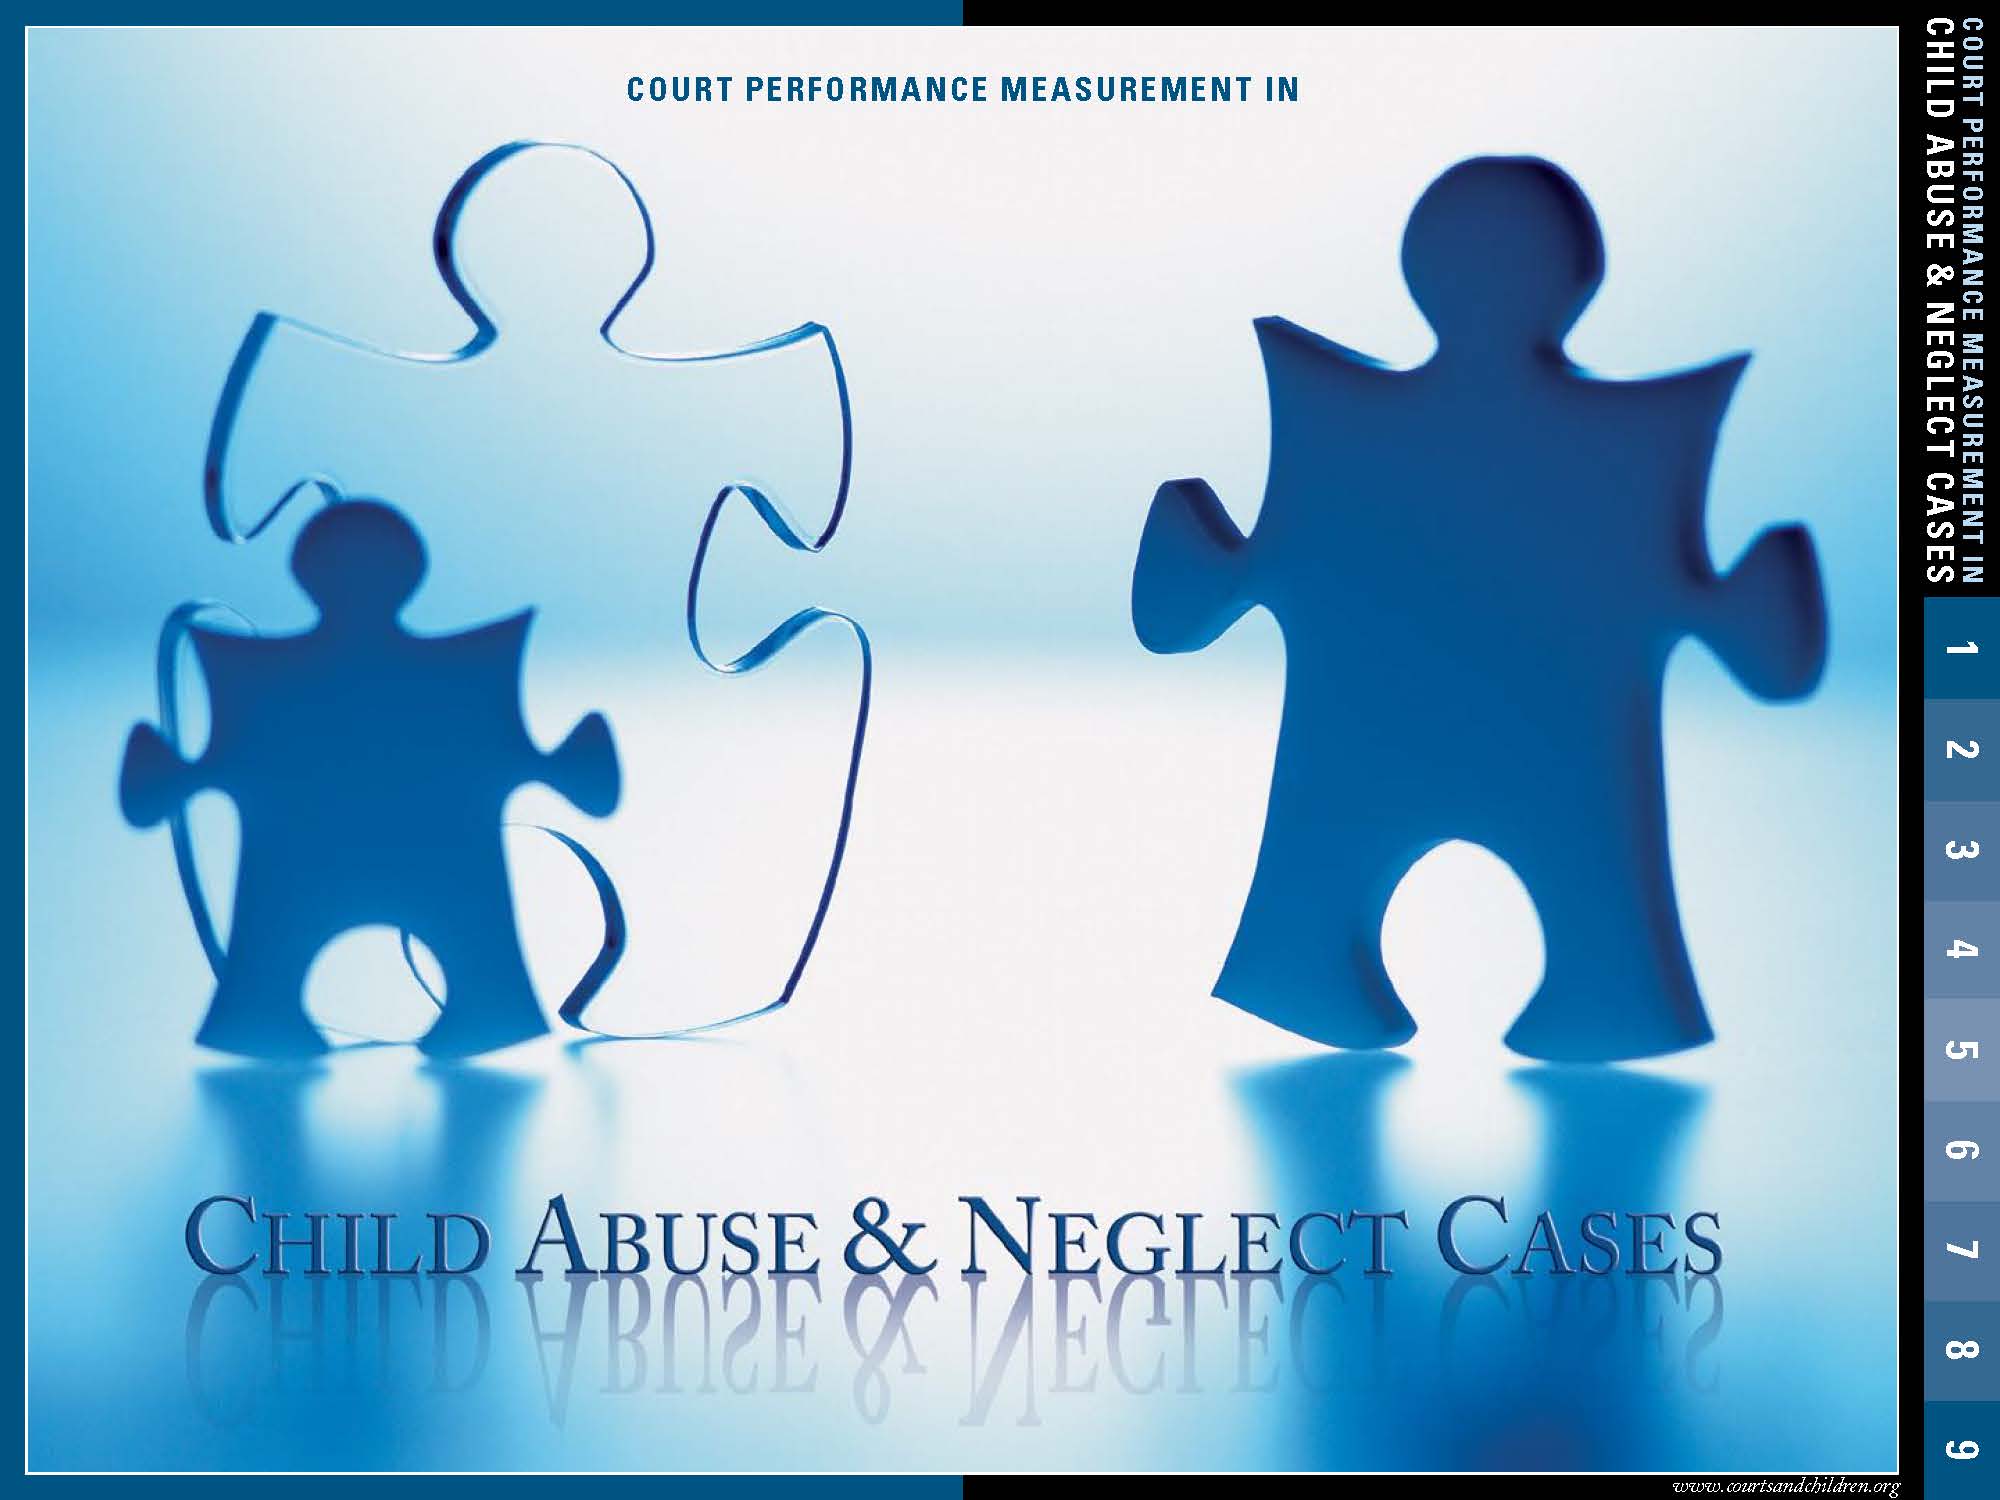 Child Abuse & Neglect Cases